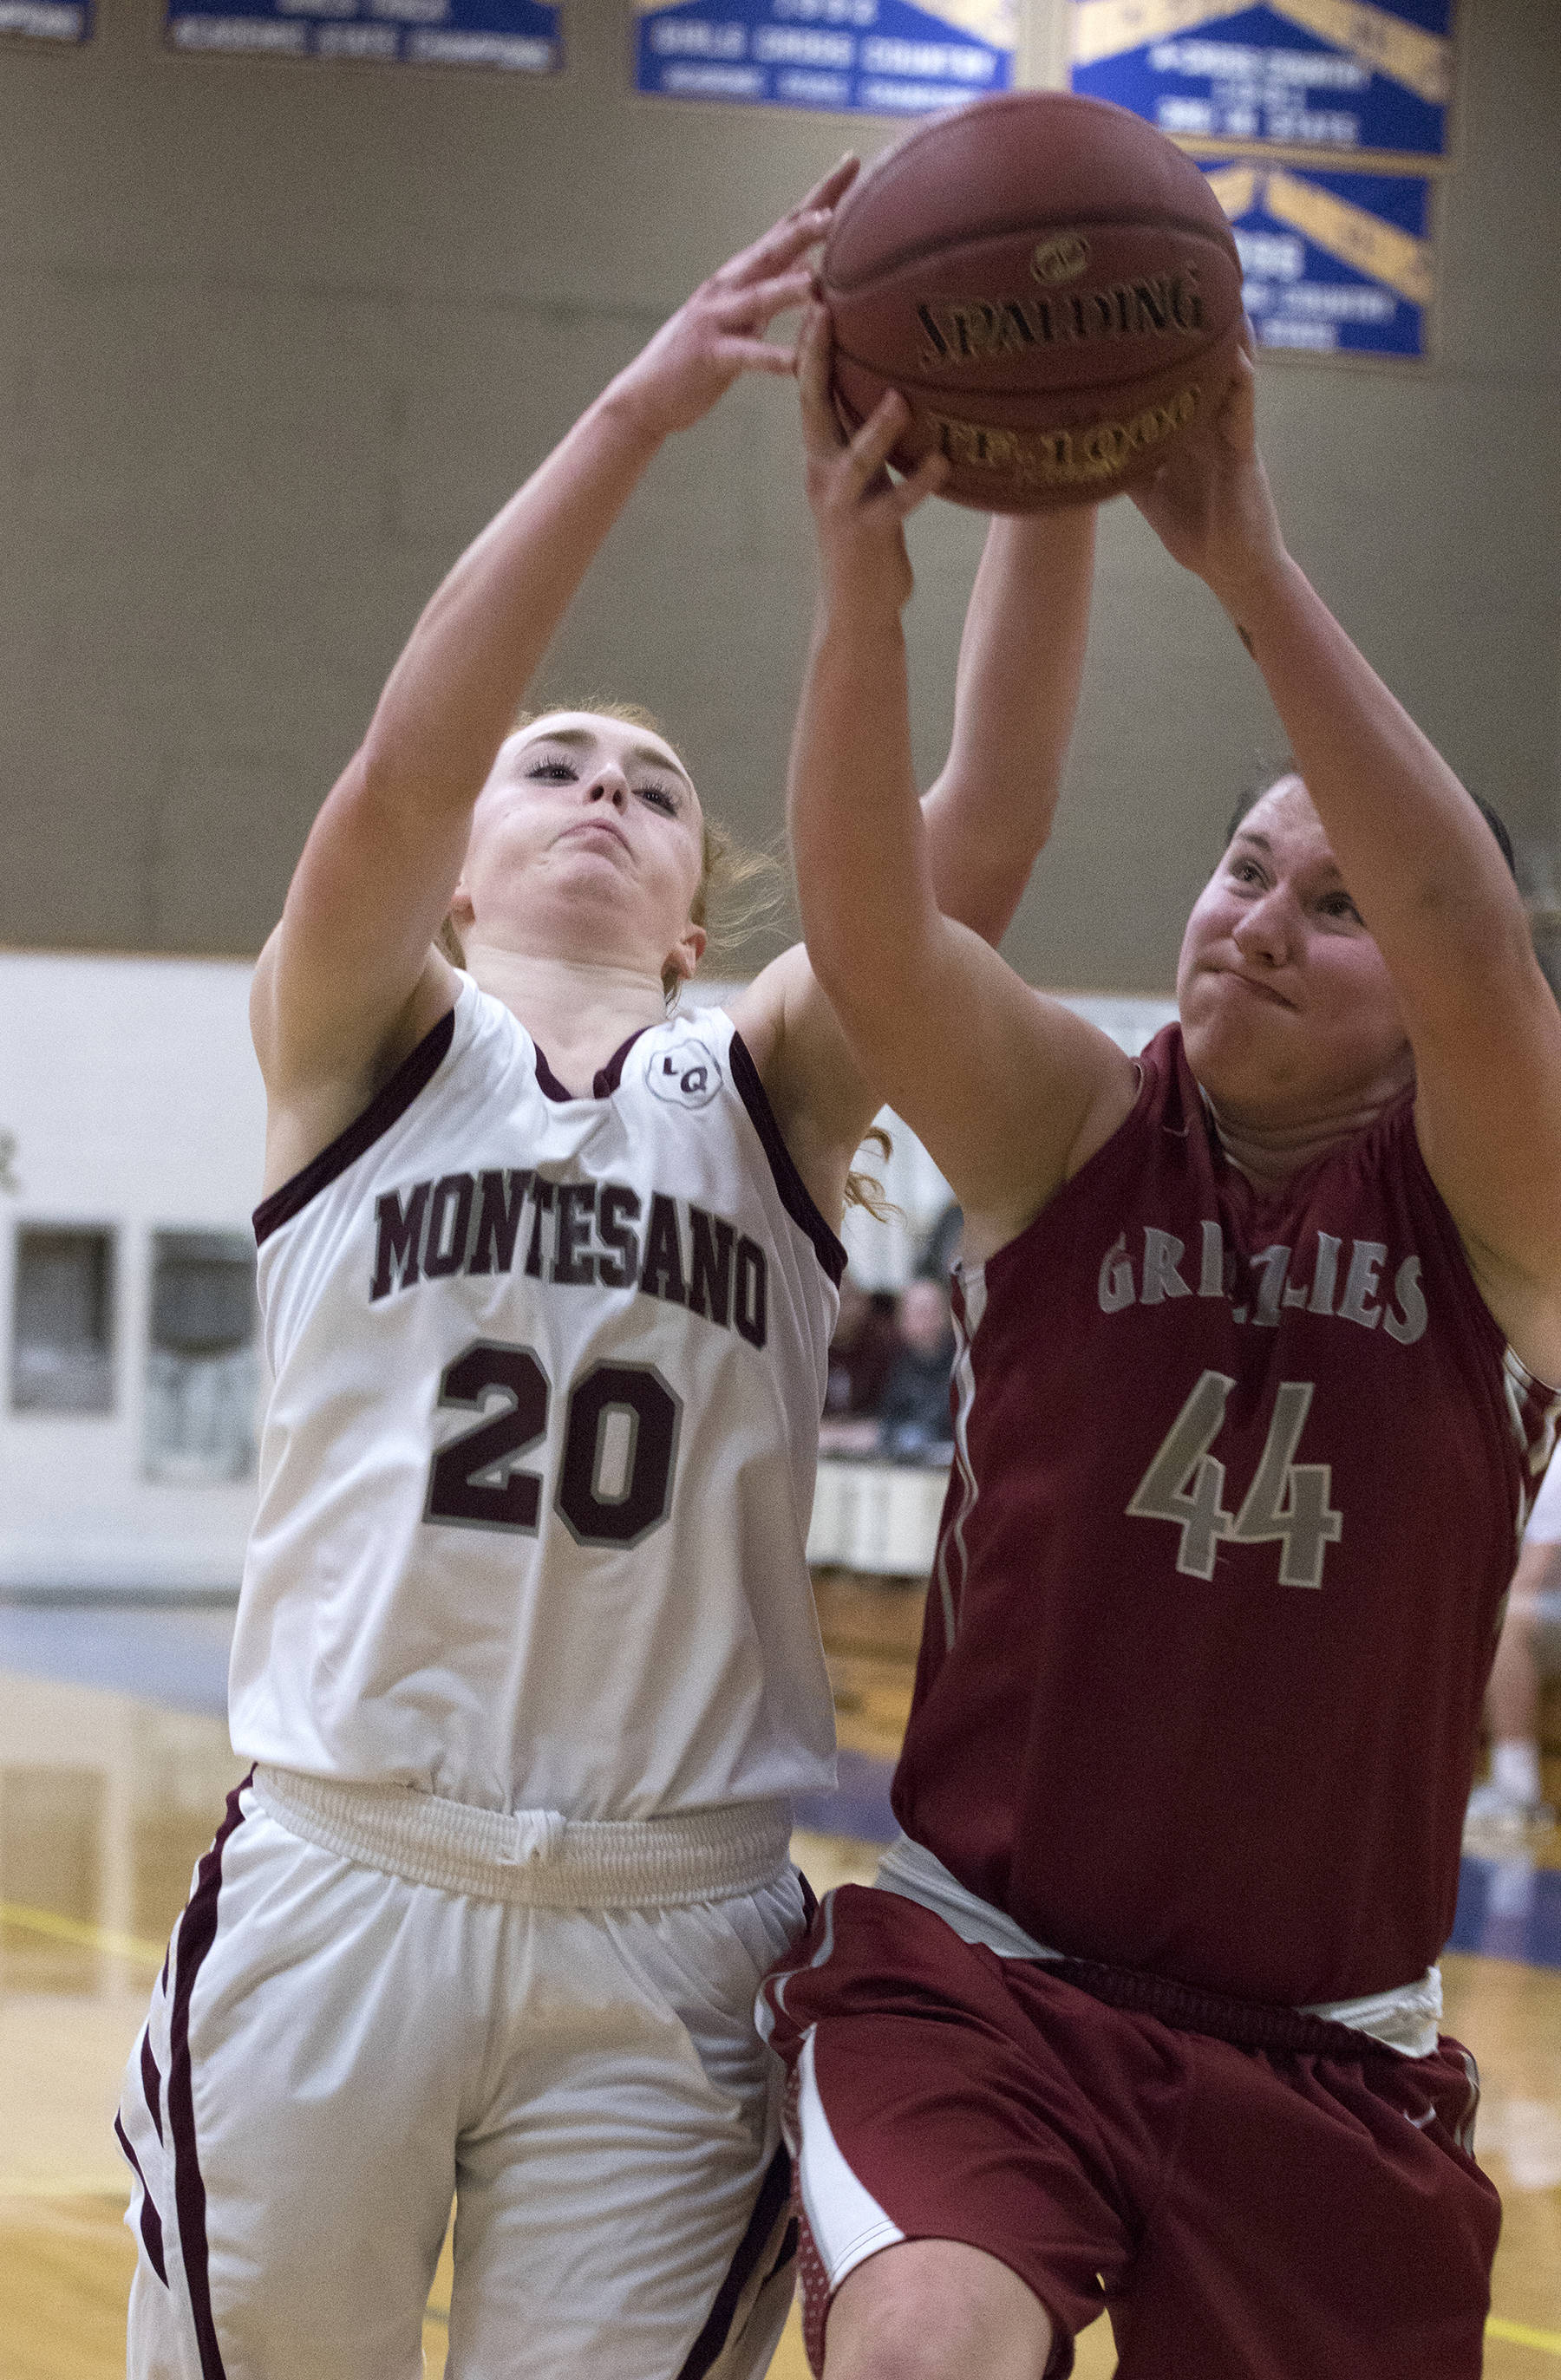 Monte girls overcome power outage and Elma to advance to regionals